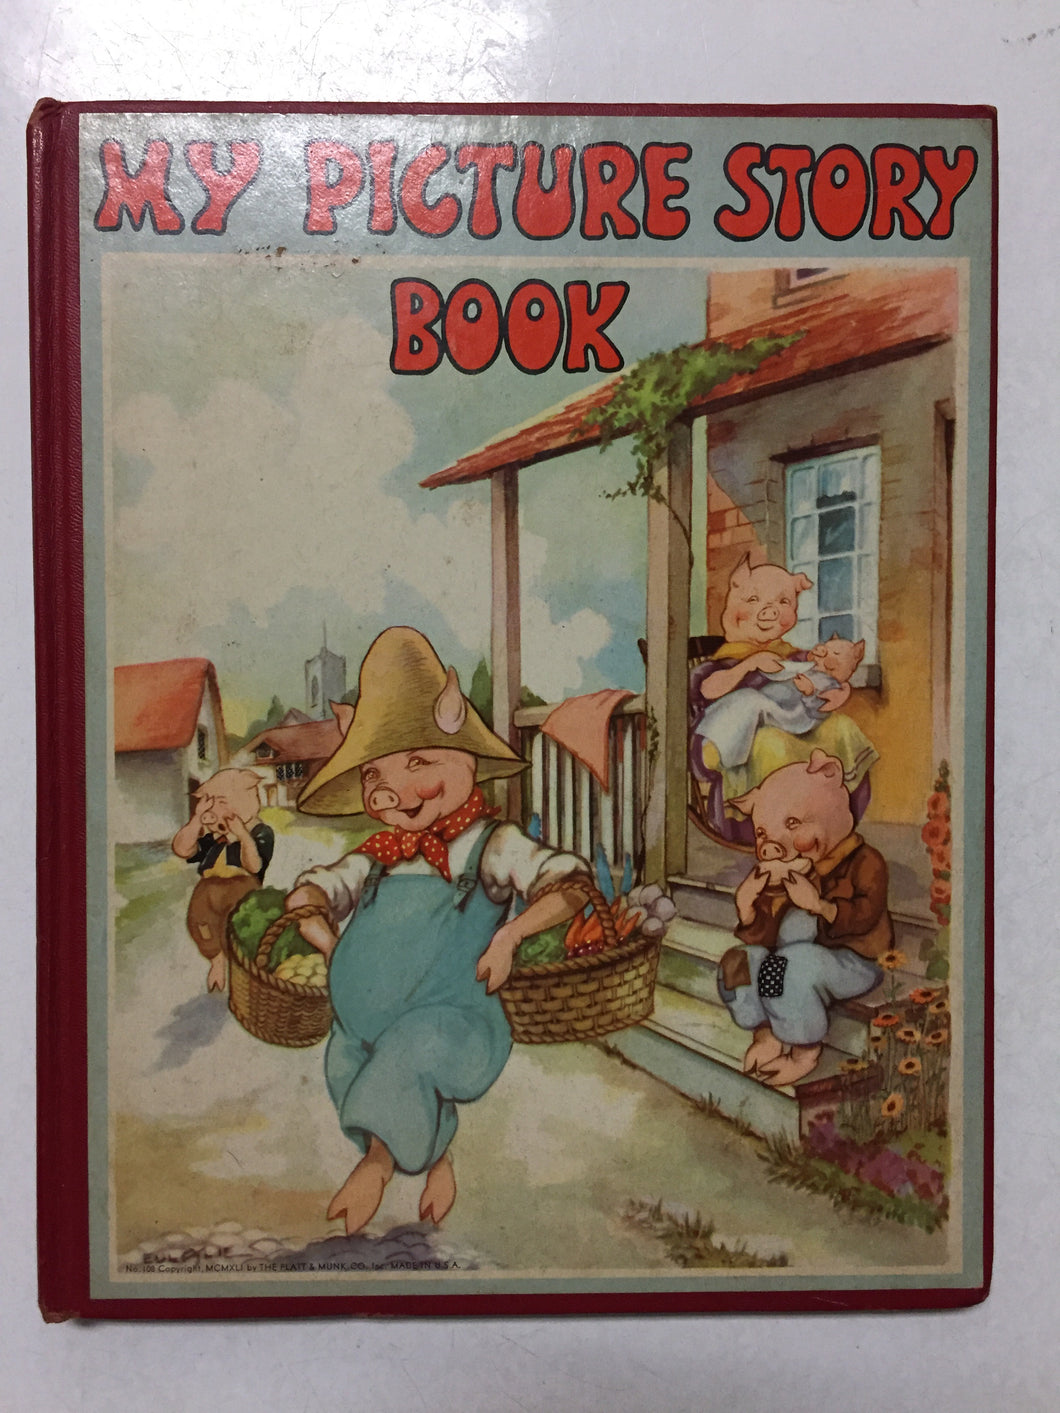 My Picture Story Book A Collection of Objects, Mother Goose Rhymes, Animal Stories - Slickcatbooks